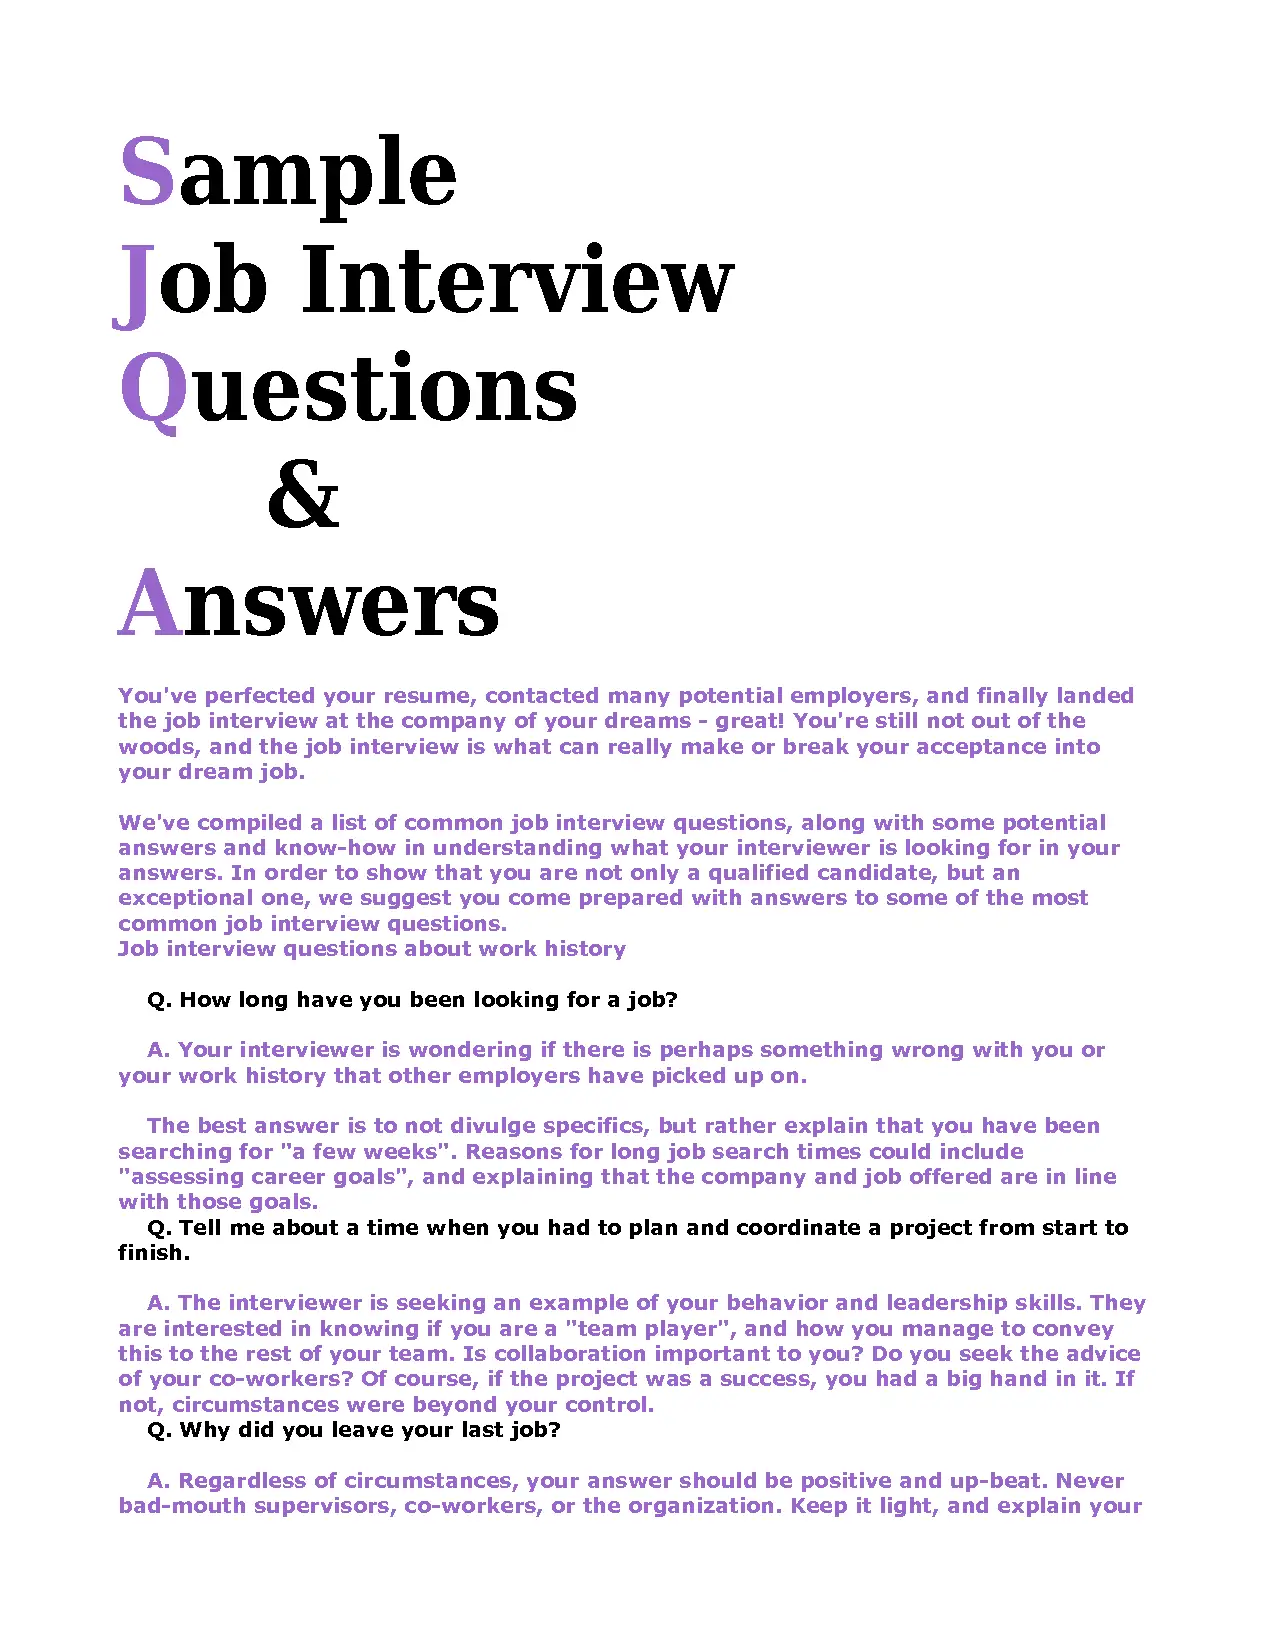 How to Answer Job Interview Questions